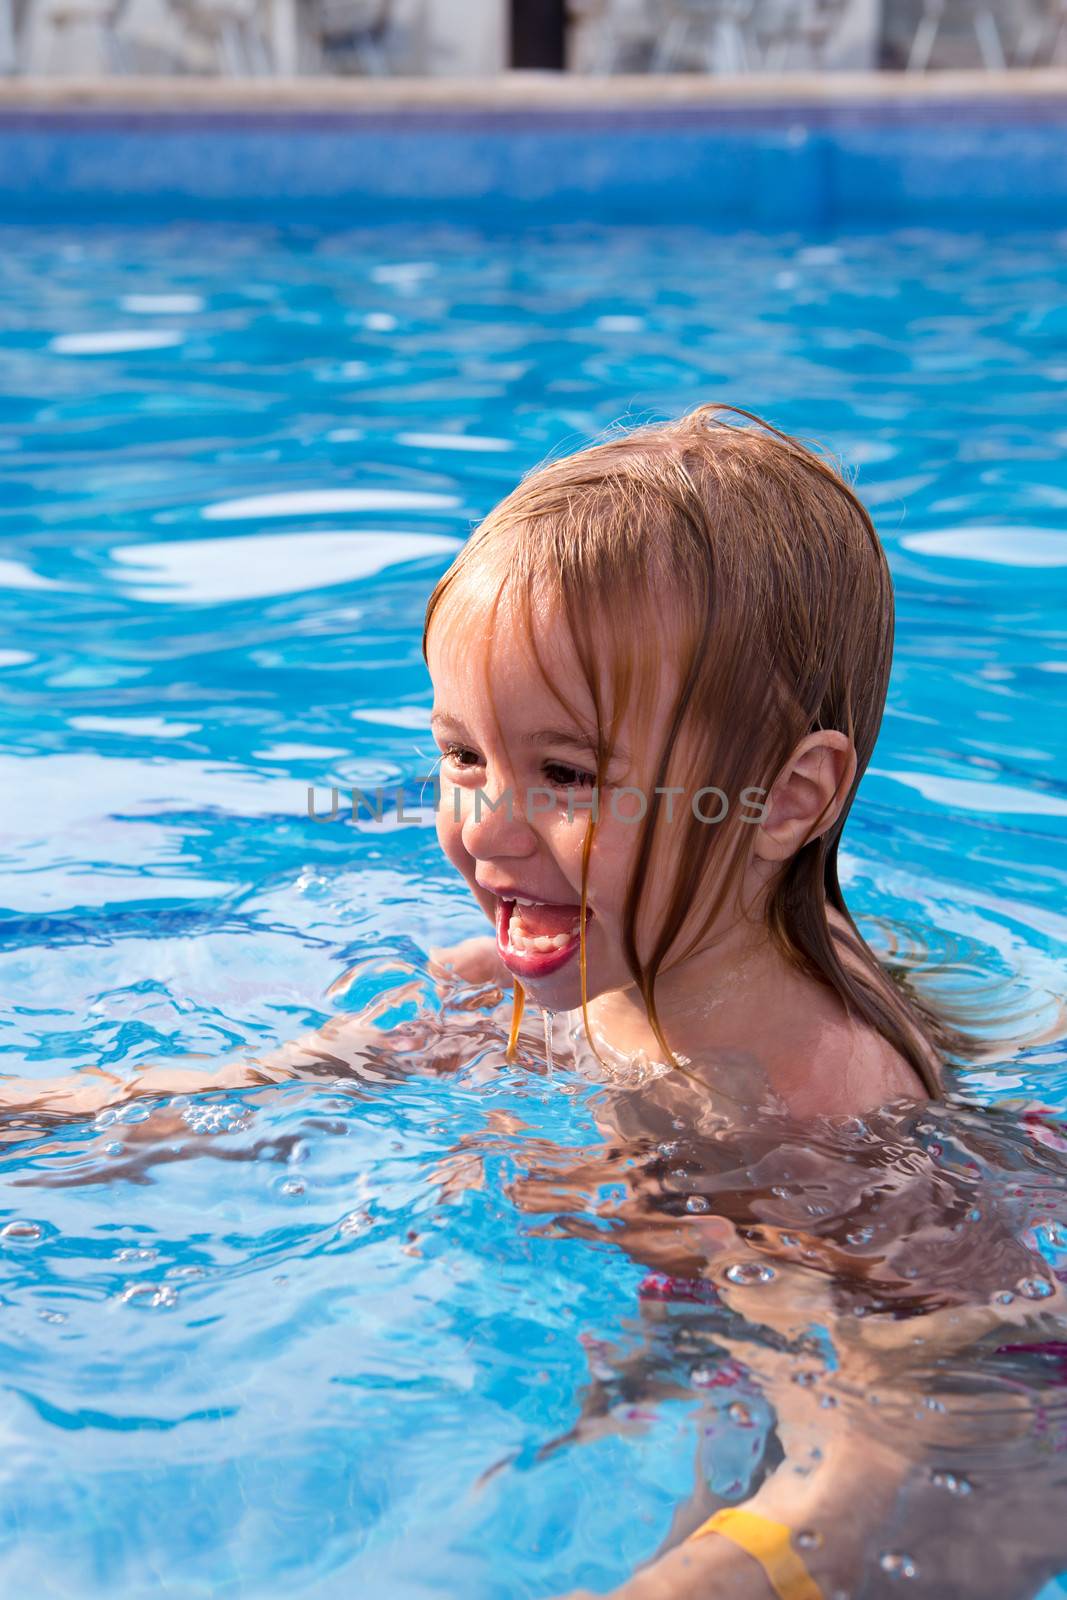 Cute toddler learning how to swim while having fun in the swimming pool